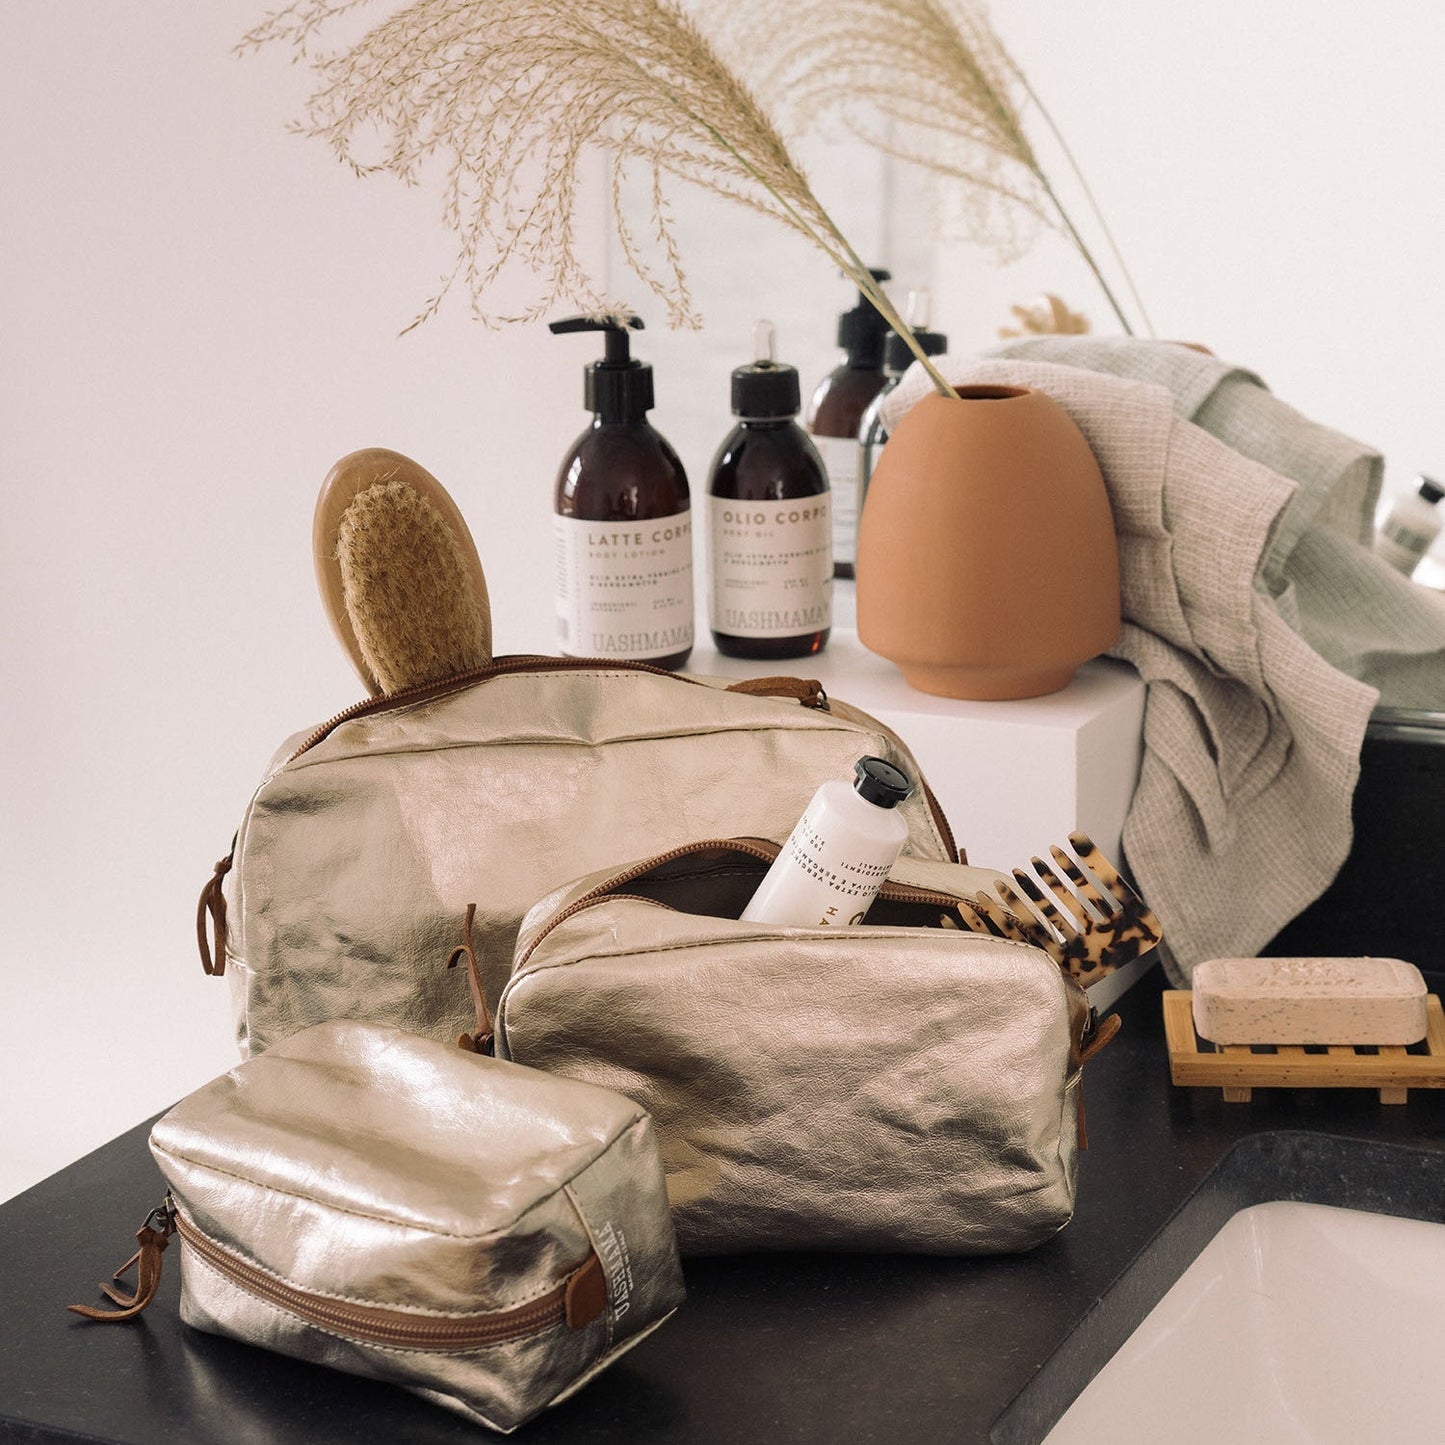 A set of three platinum metallic washable paper toiletry bags is shown. One contains a hairbrush, and another contains a comb and a tube of hand cream. Also shown are bottles of beauty products and a terracotta vase with a sheaf of wheat.